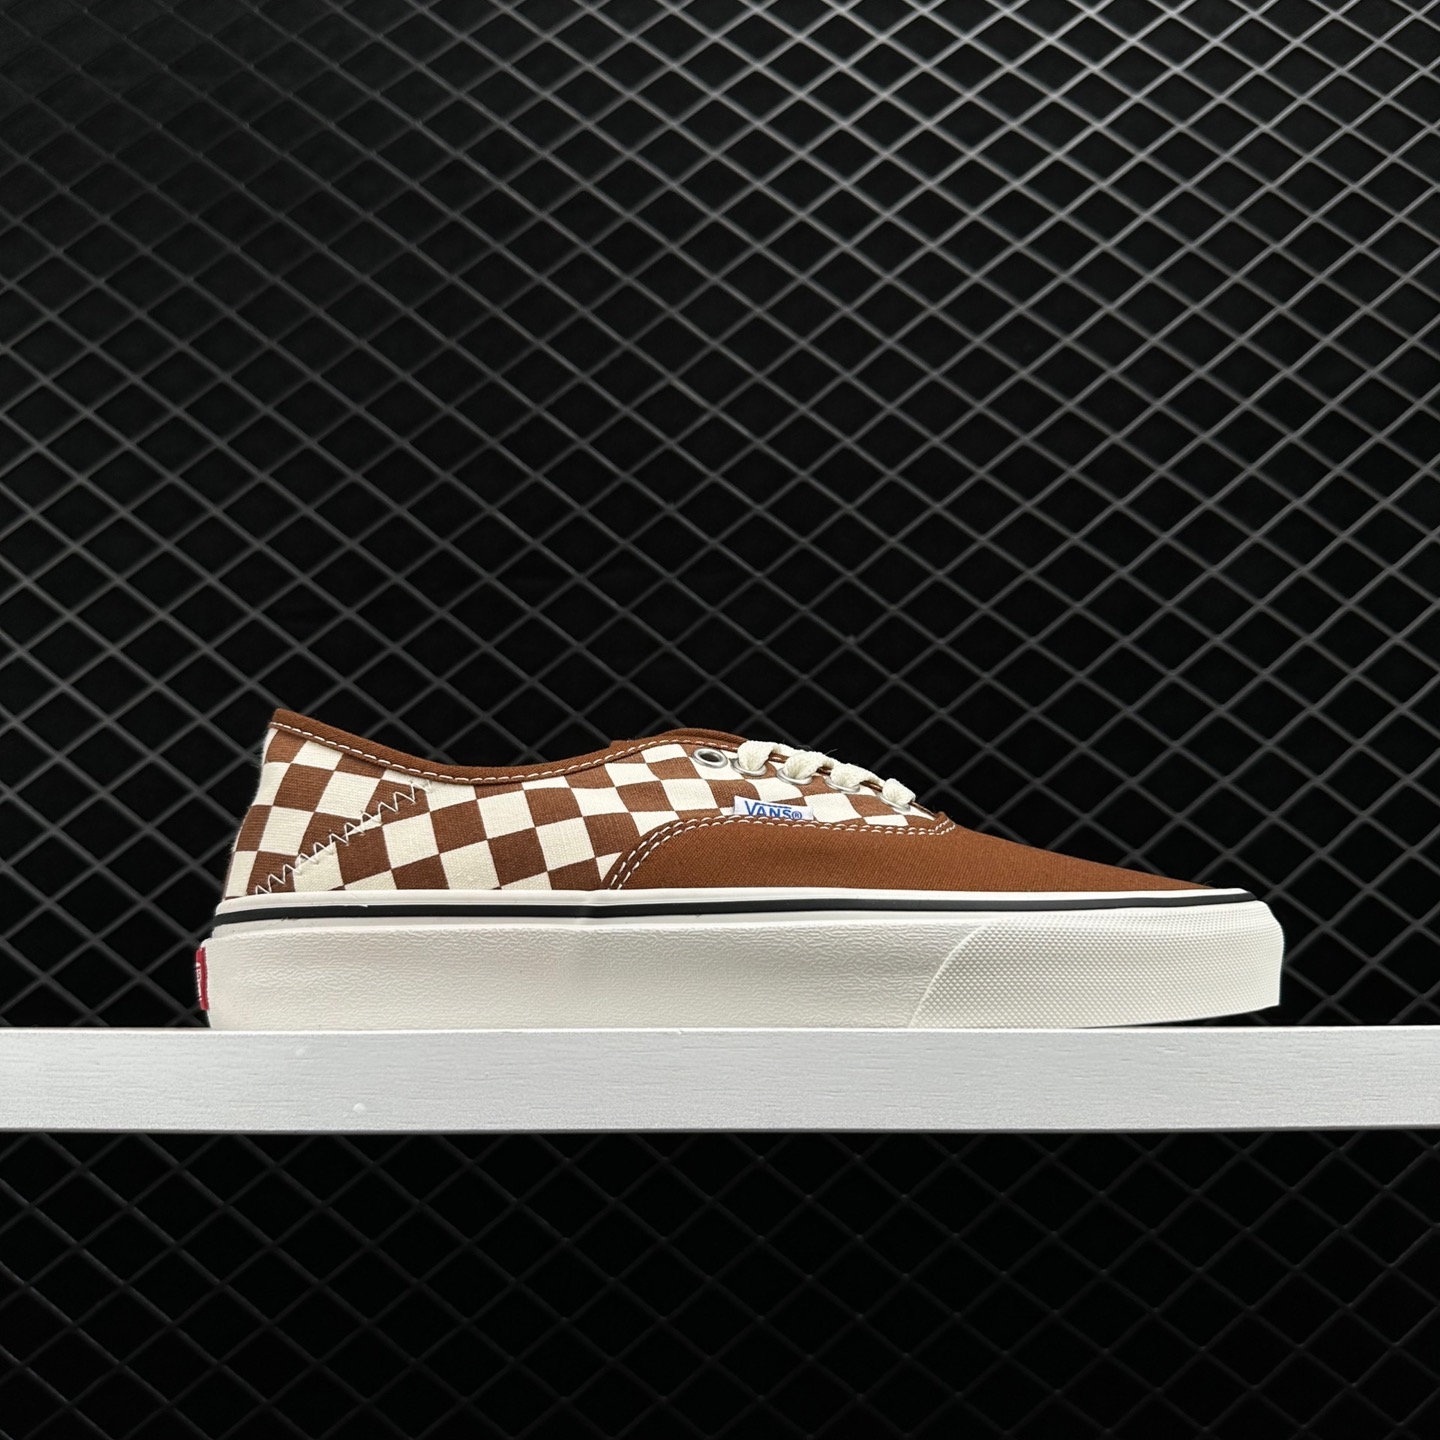 Vans Authentic Low Tops Brown White Shoes | Unisex Casual Skateboarding